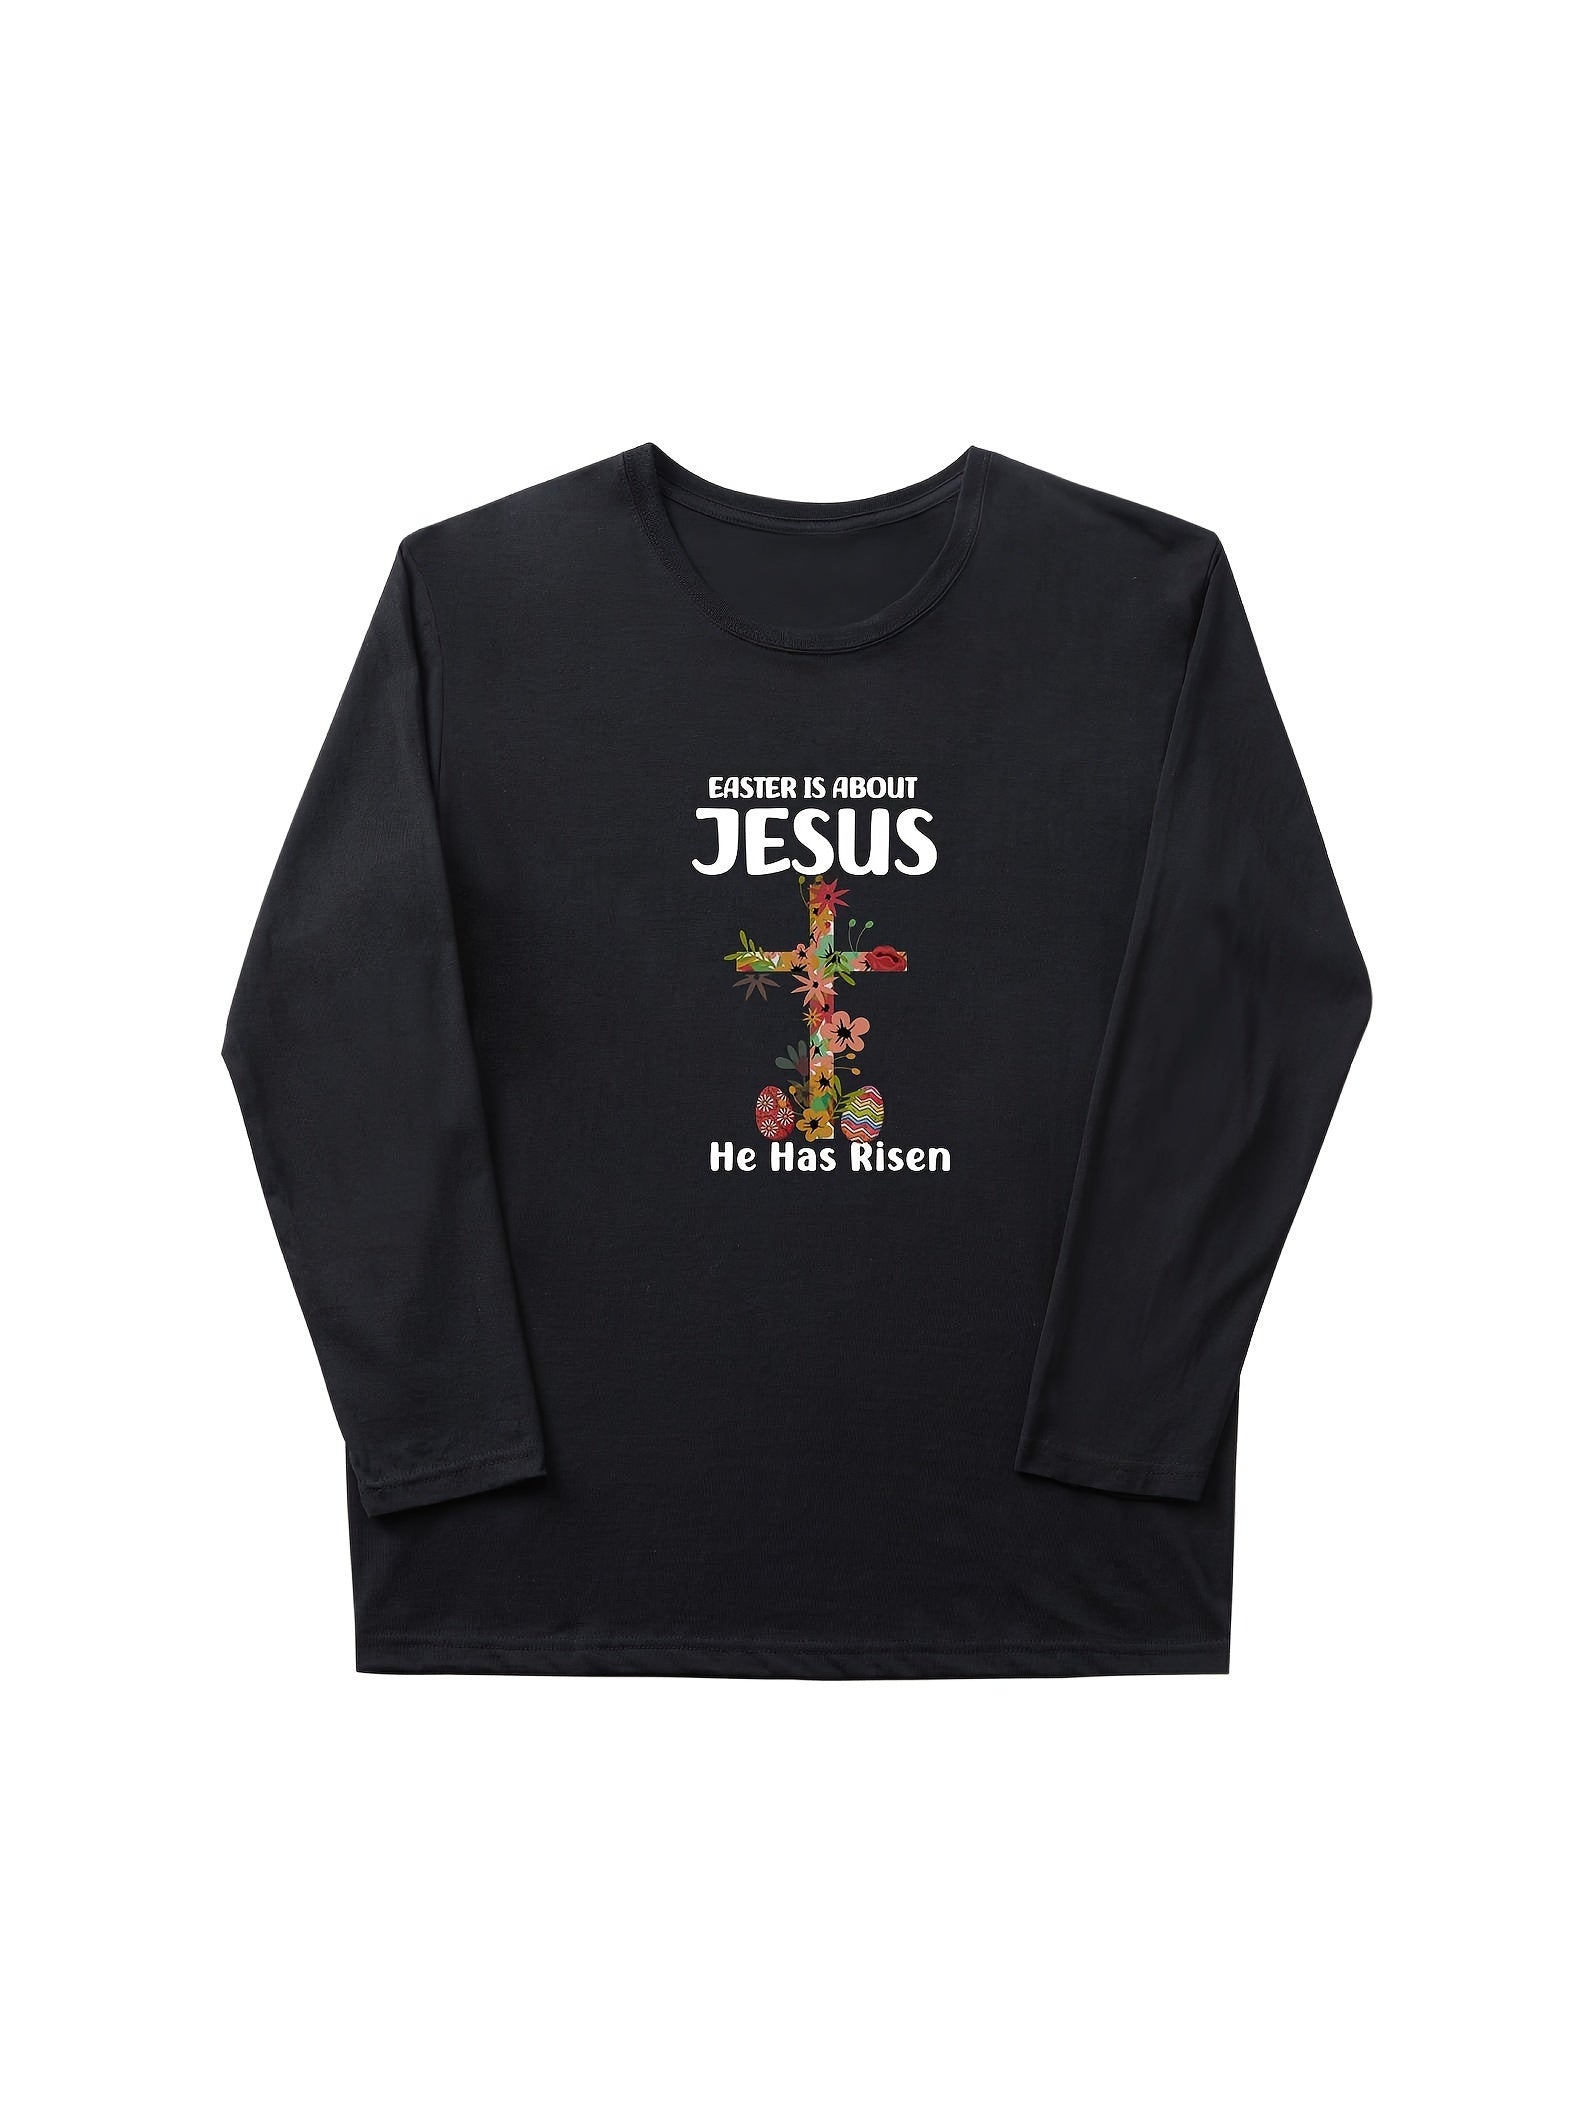 Easter Is About Jesus: He Has Risen Unisex Christian Pullover Sweatshirt claimedbygoddesigns